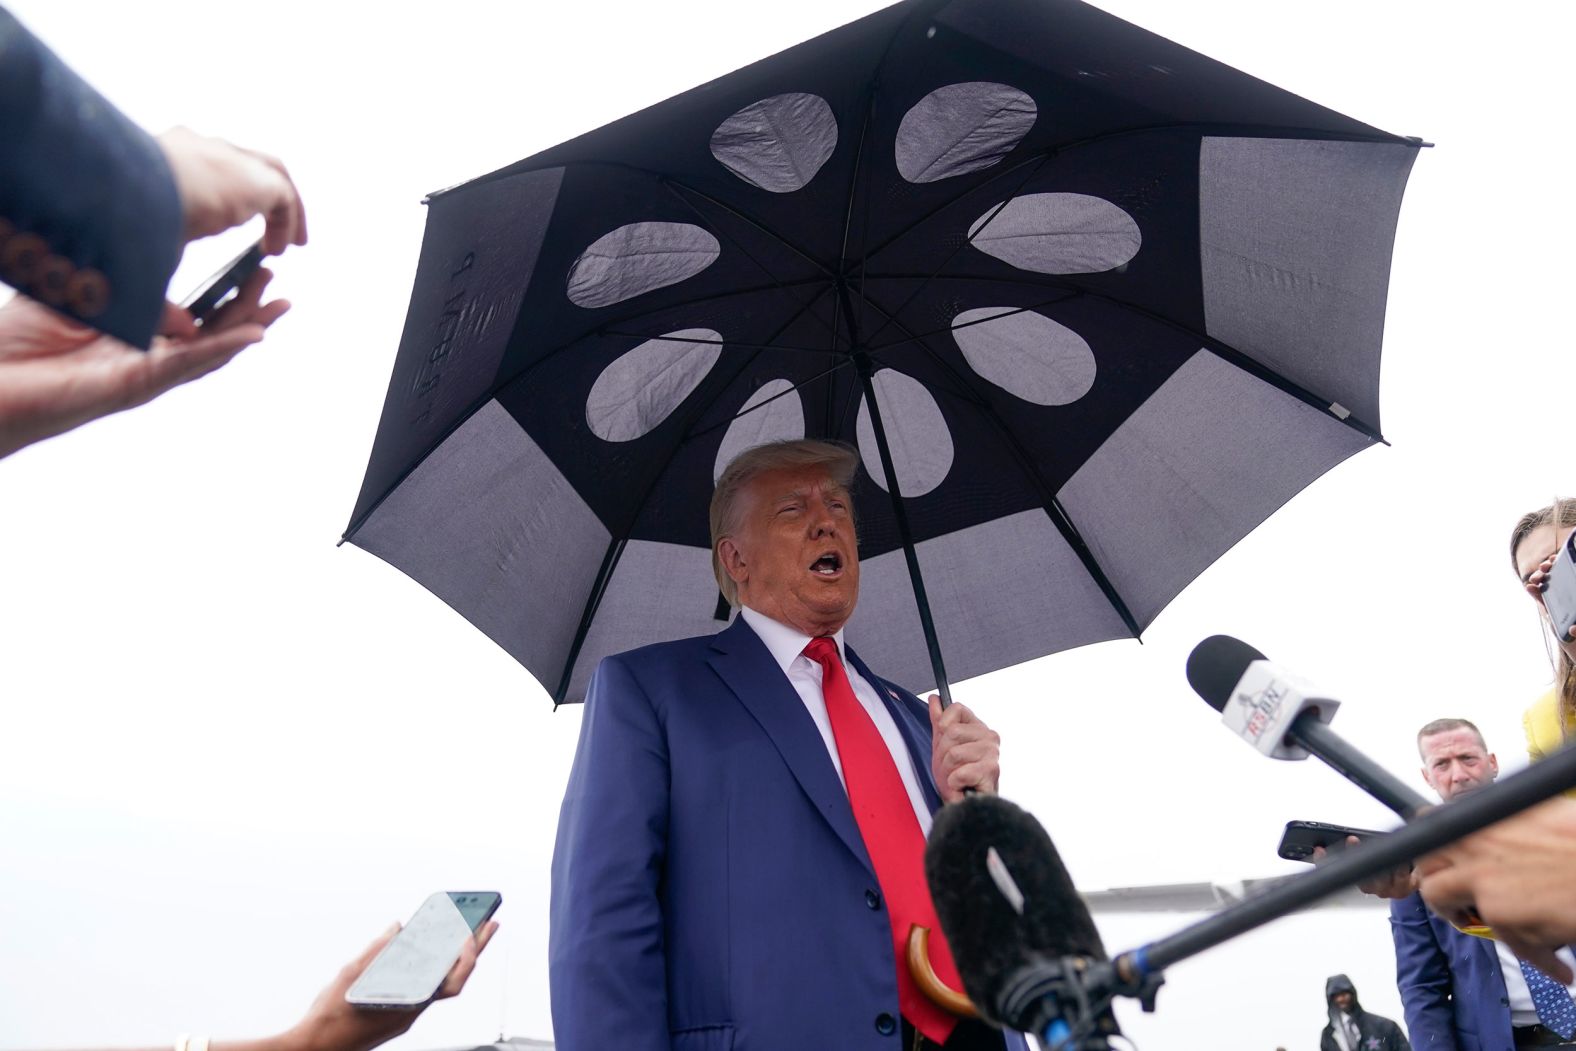 Trump speaks before boarding a plane in Arlington, Virginia, in August 2023. <a href="https://www.cnn.com/2023/08/03/politics/arraignment-trump-election-interference-indictment/index.html" target="_blank">Trump pleaded not guilty</a> to four criminal charges related to his efforts to overturn the 2020 presidential election.